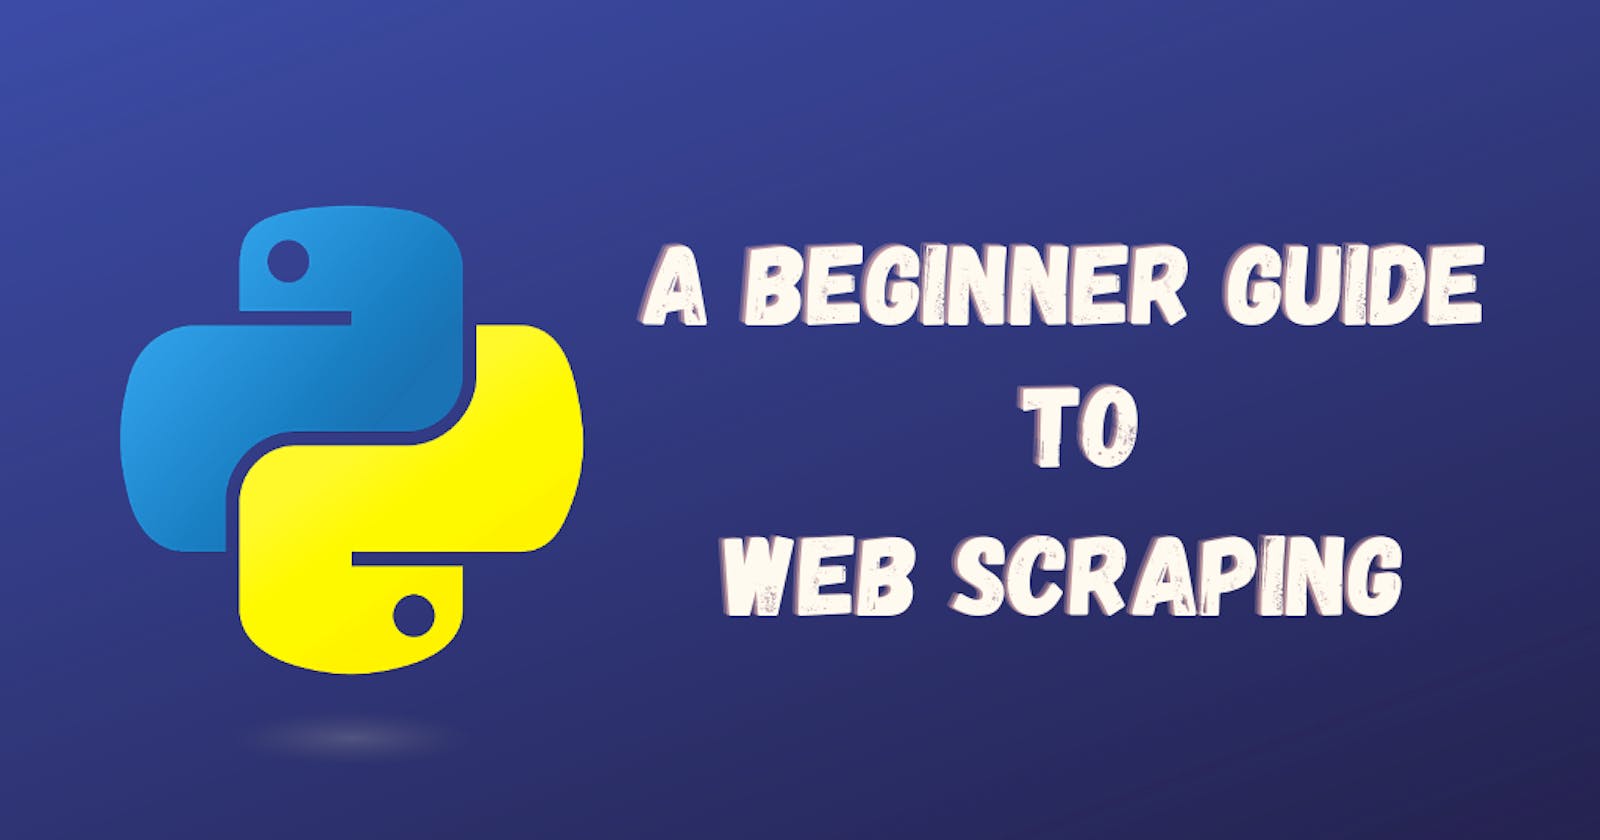 A beginner guide to webscraping in Python